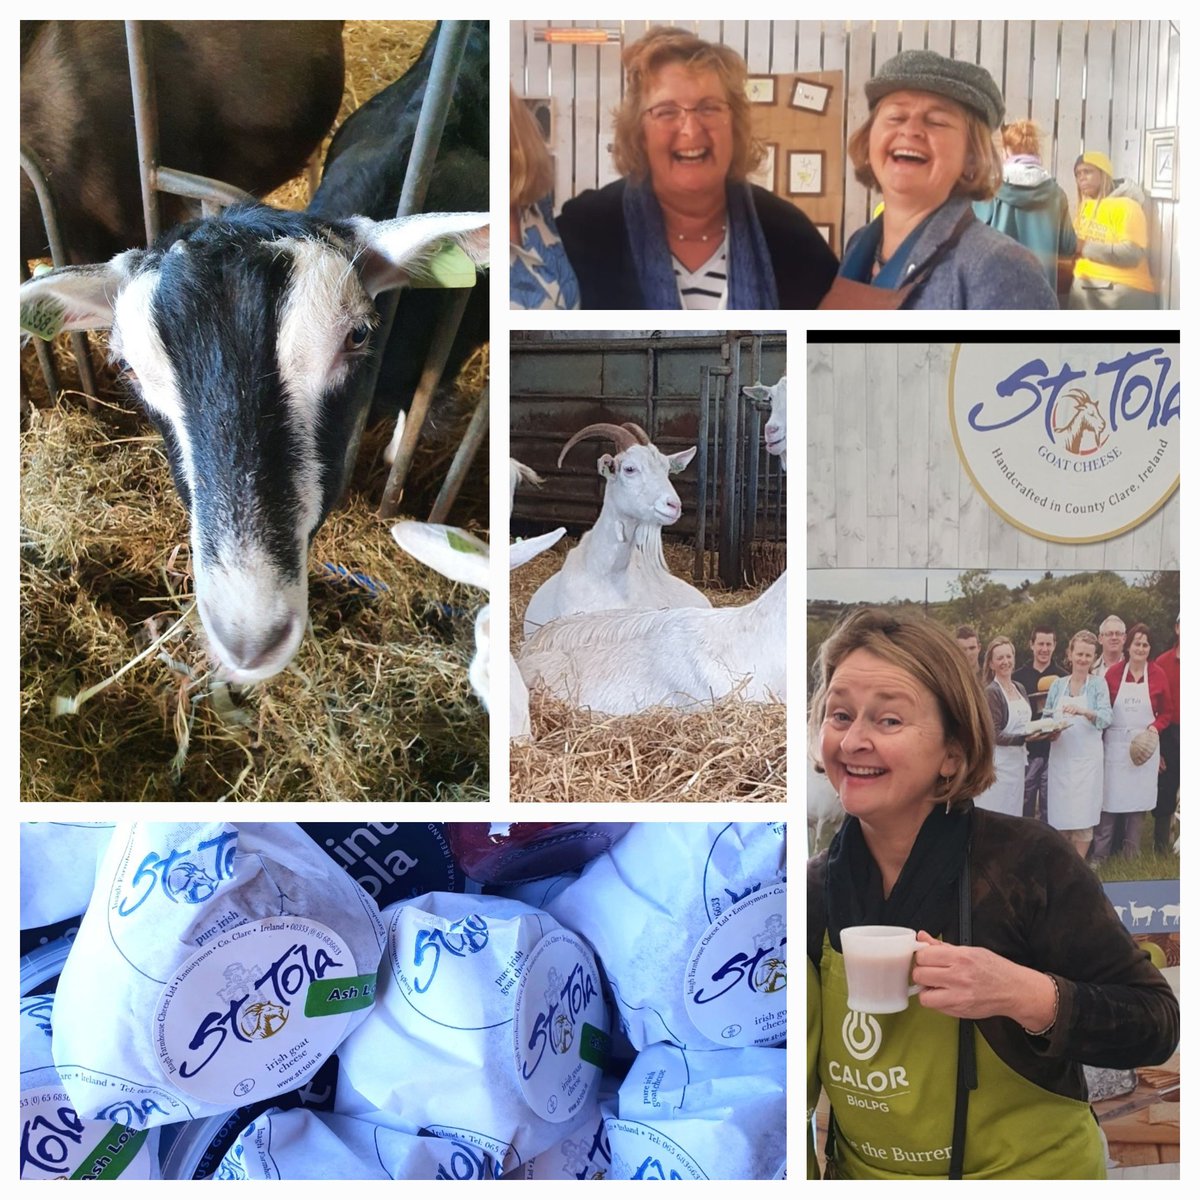 Day 3 meet the local producers. 
Siobhan @StTolaCheese - cheesemaker and great craic! Her goats cheese, made in the Burren,is so good. Looking forward to introducing the guests to Siobhan and the goats in May #foodtours
#Irishfoodproducers